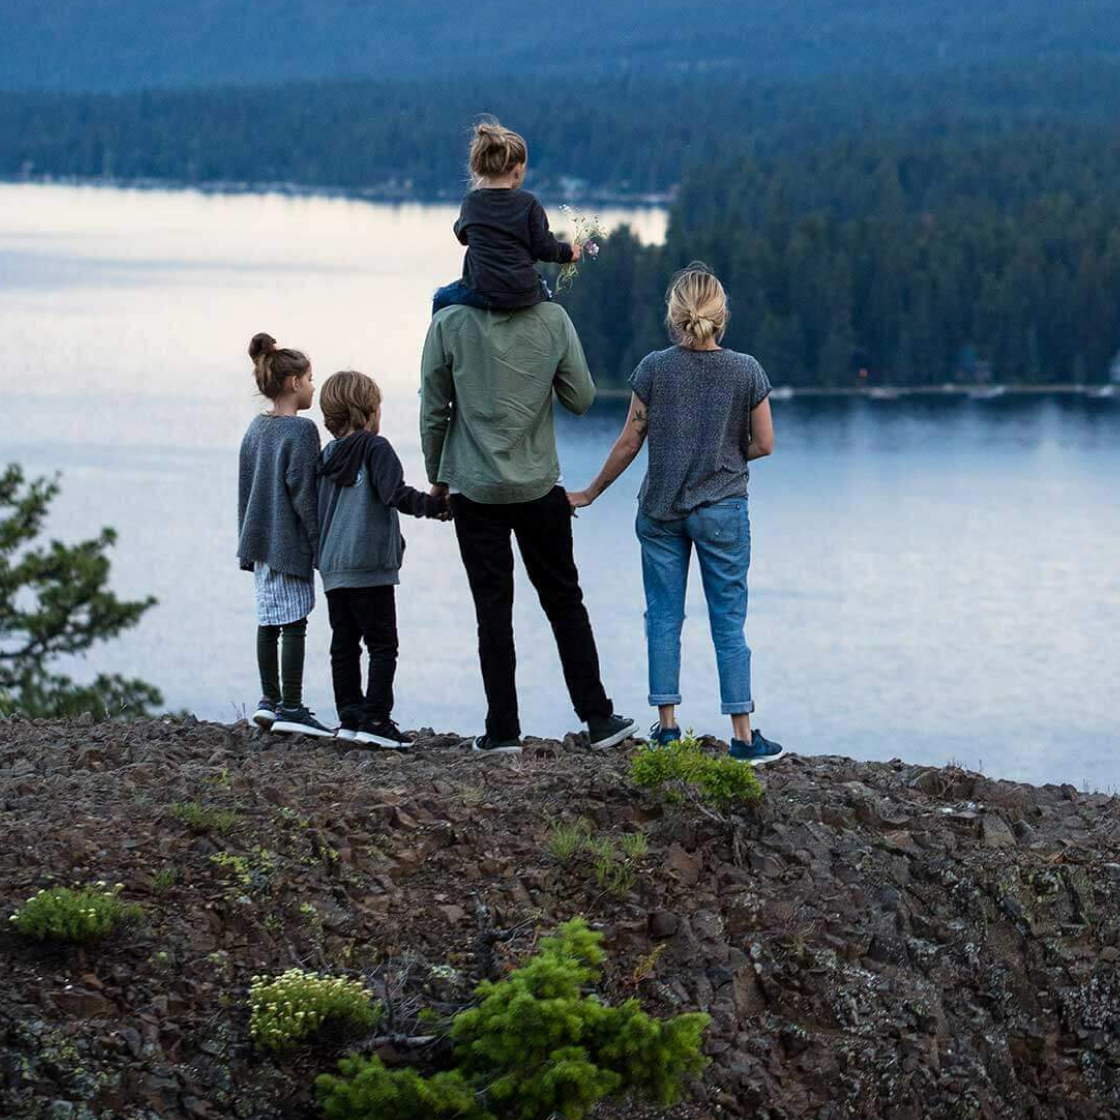 A family stands overlooking a scenic lake with backs to the viewer